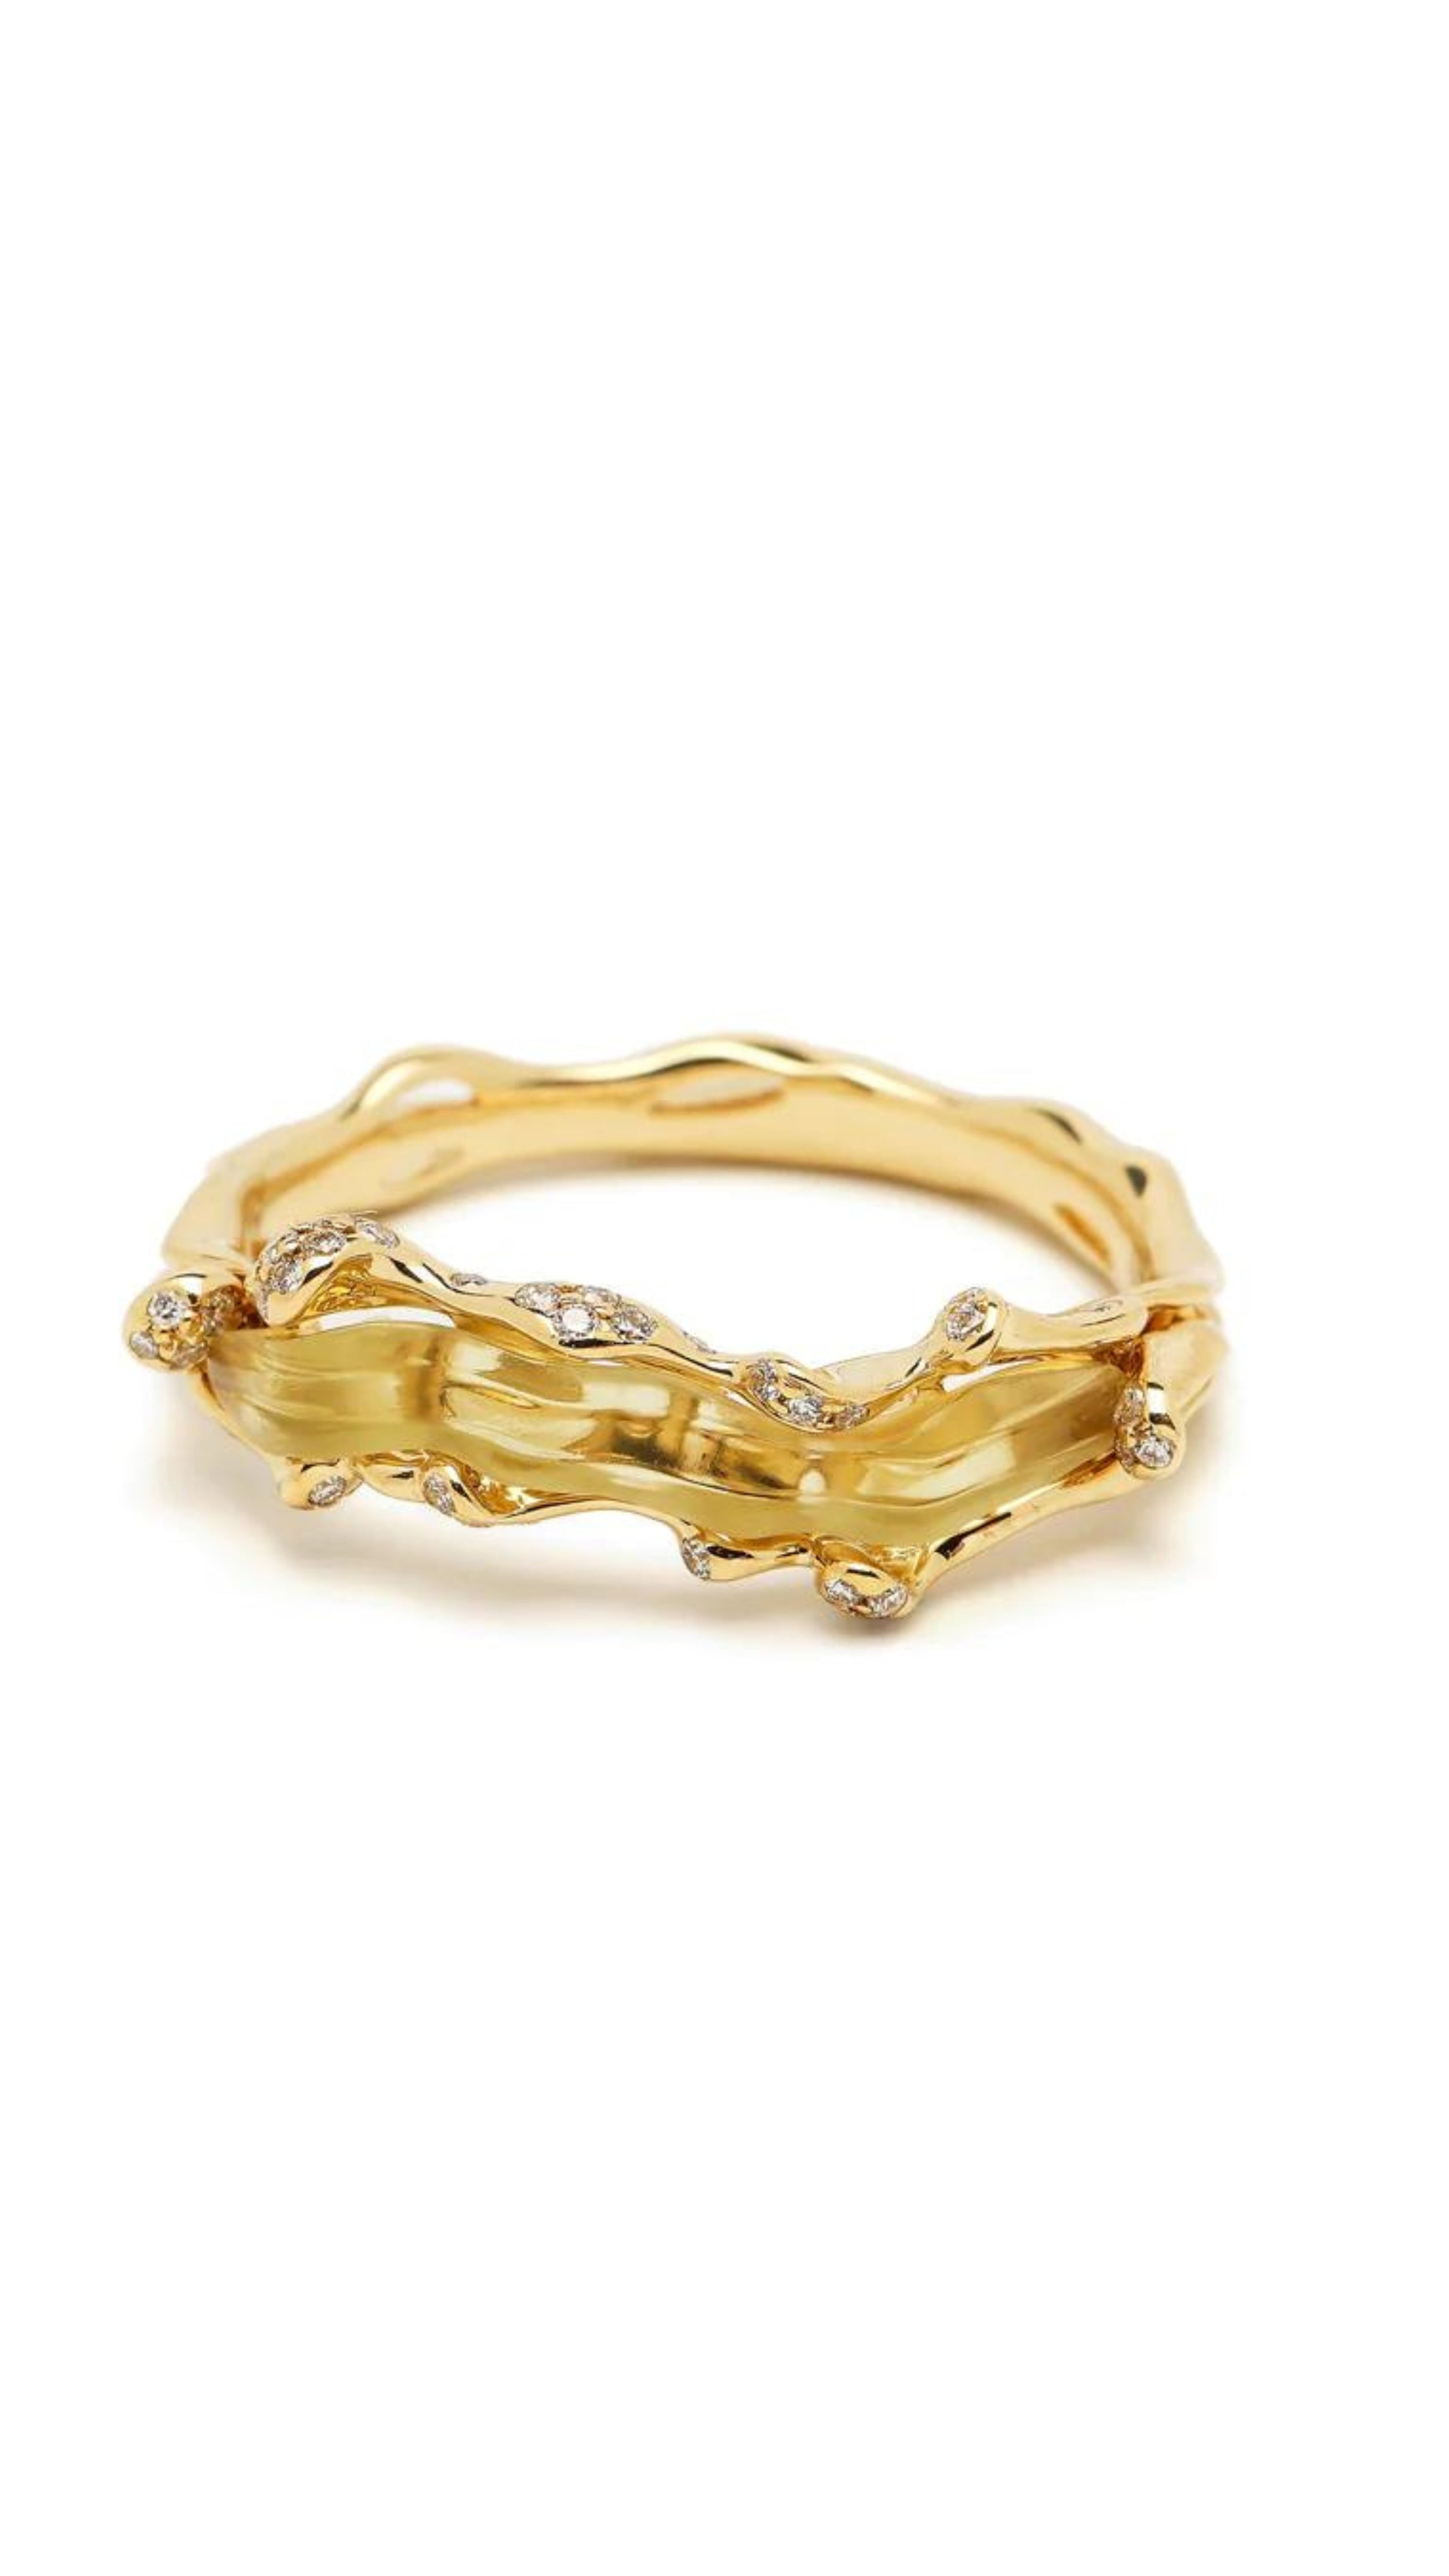 Bibi van der Velden, Olive Quartz Wave Stackable Ring. Organic wave shaped ring crafted in 18K gold with olive quartz inset and white diamonds. Shown from the front. 